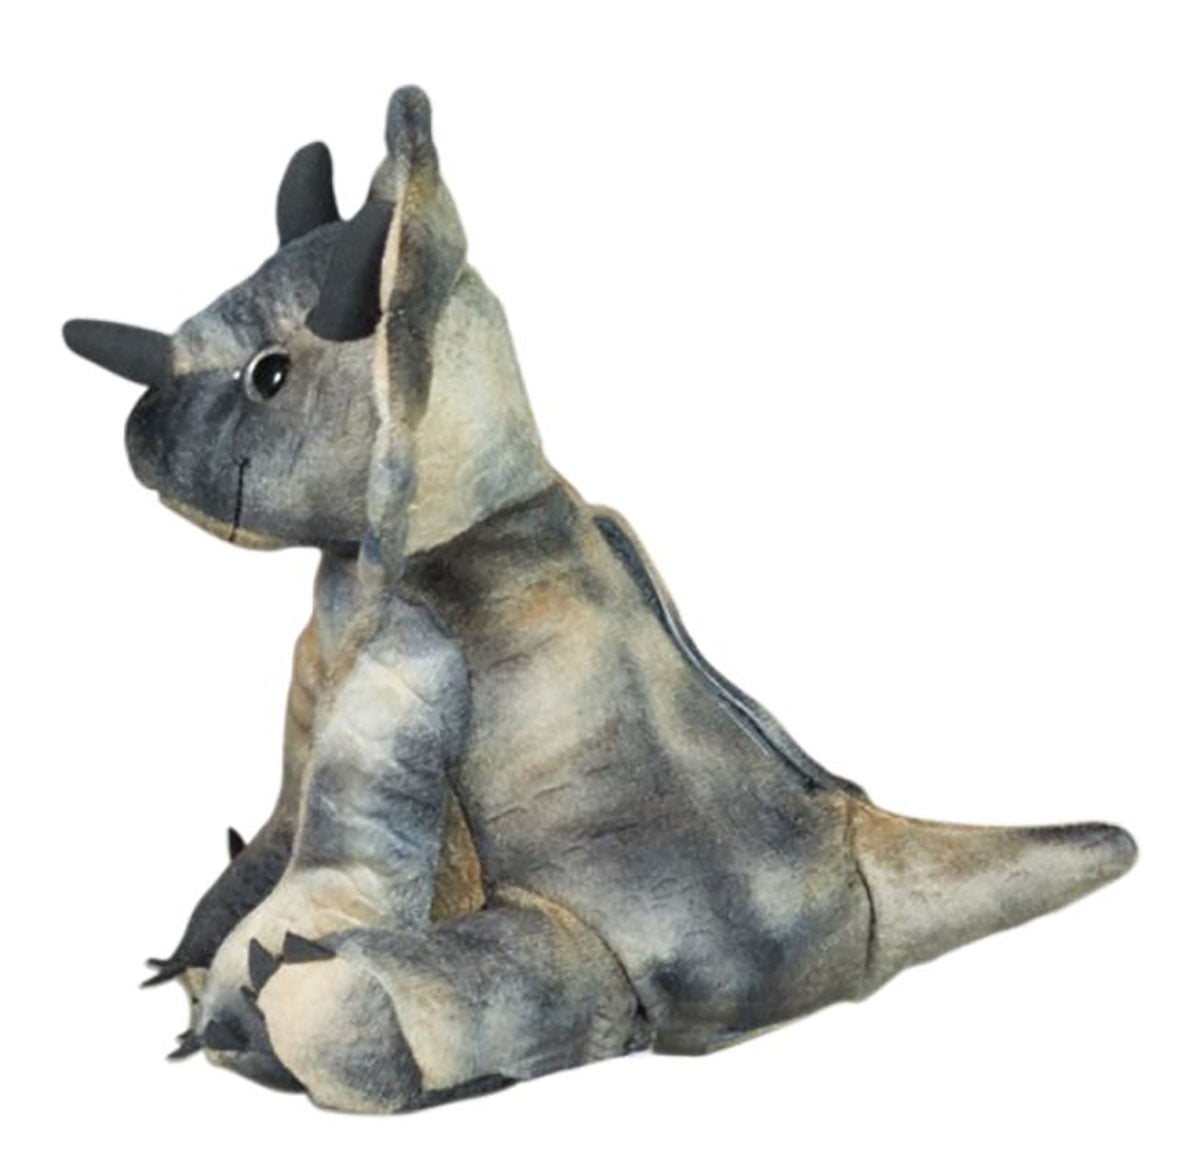 Ready 2 Love in a Few Easy Record Your Own Plush 16 inch Triceratops Dinosaur 